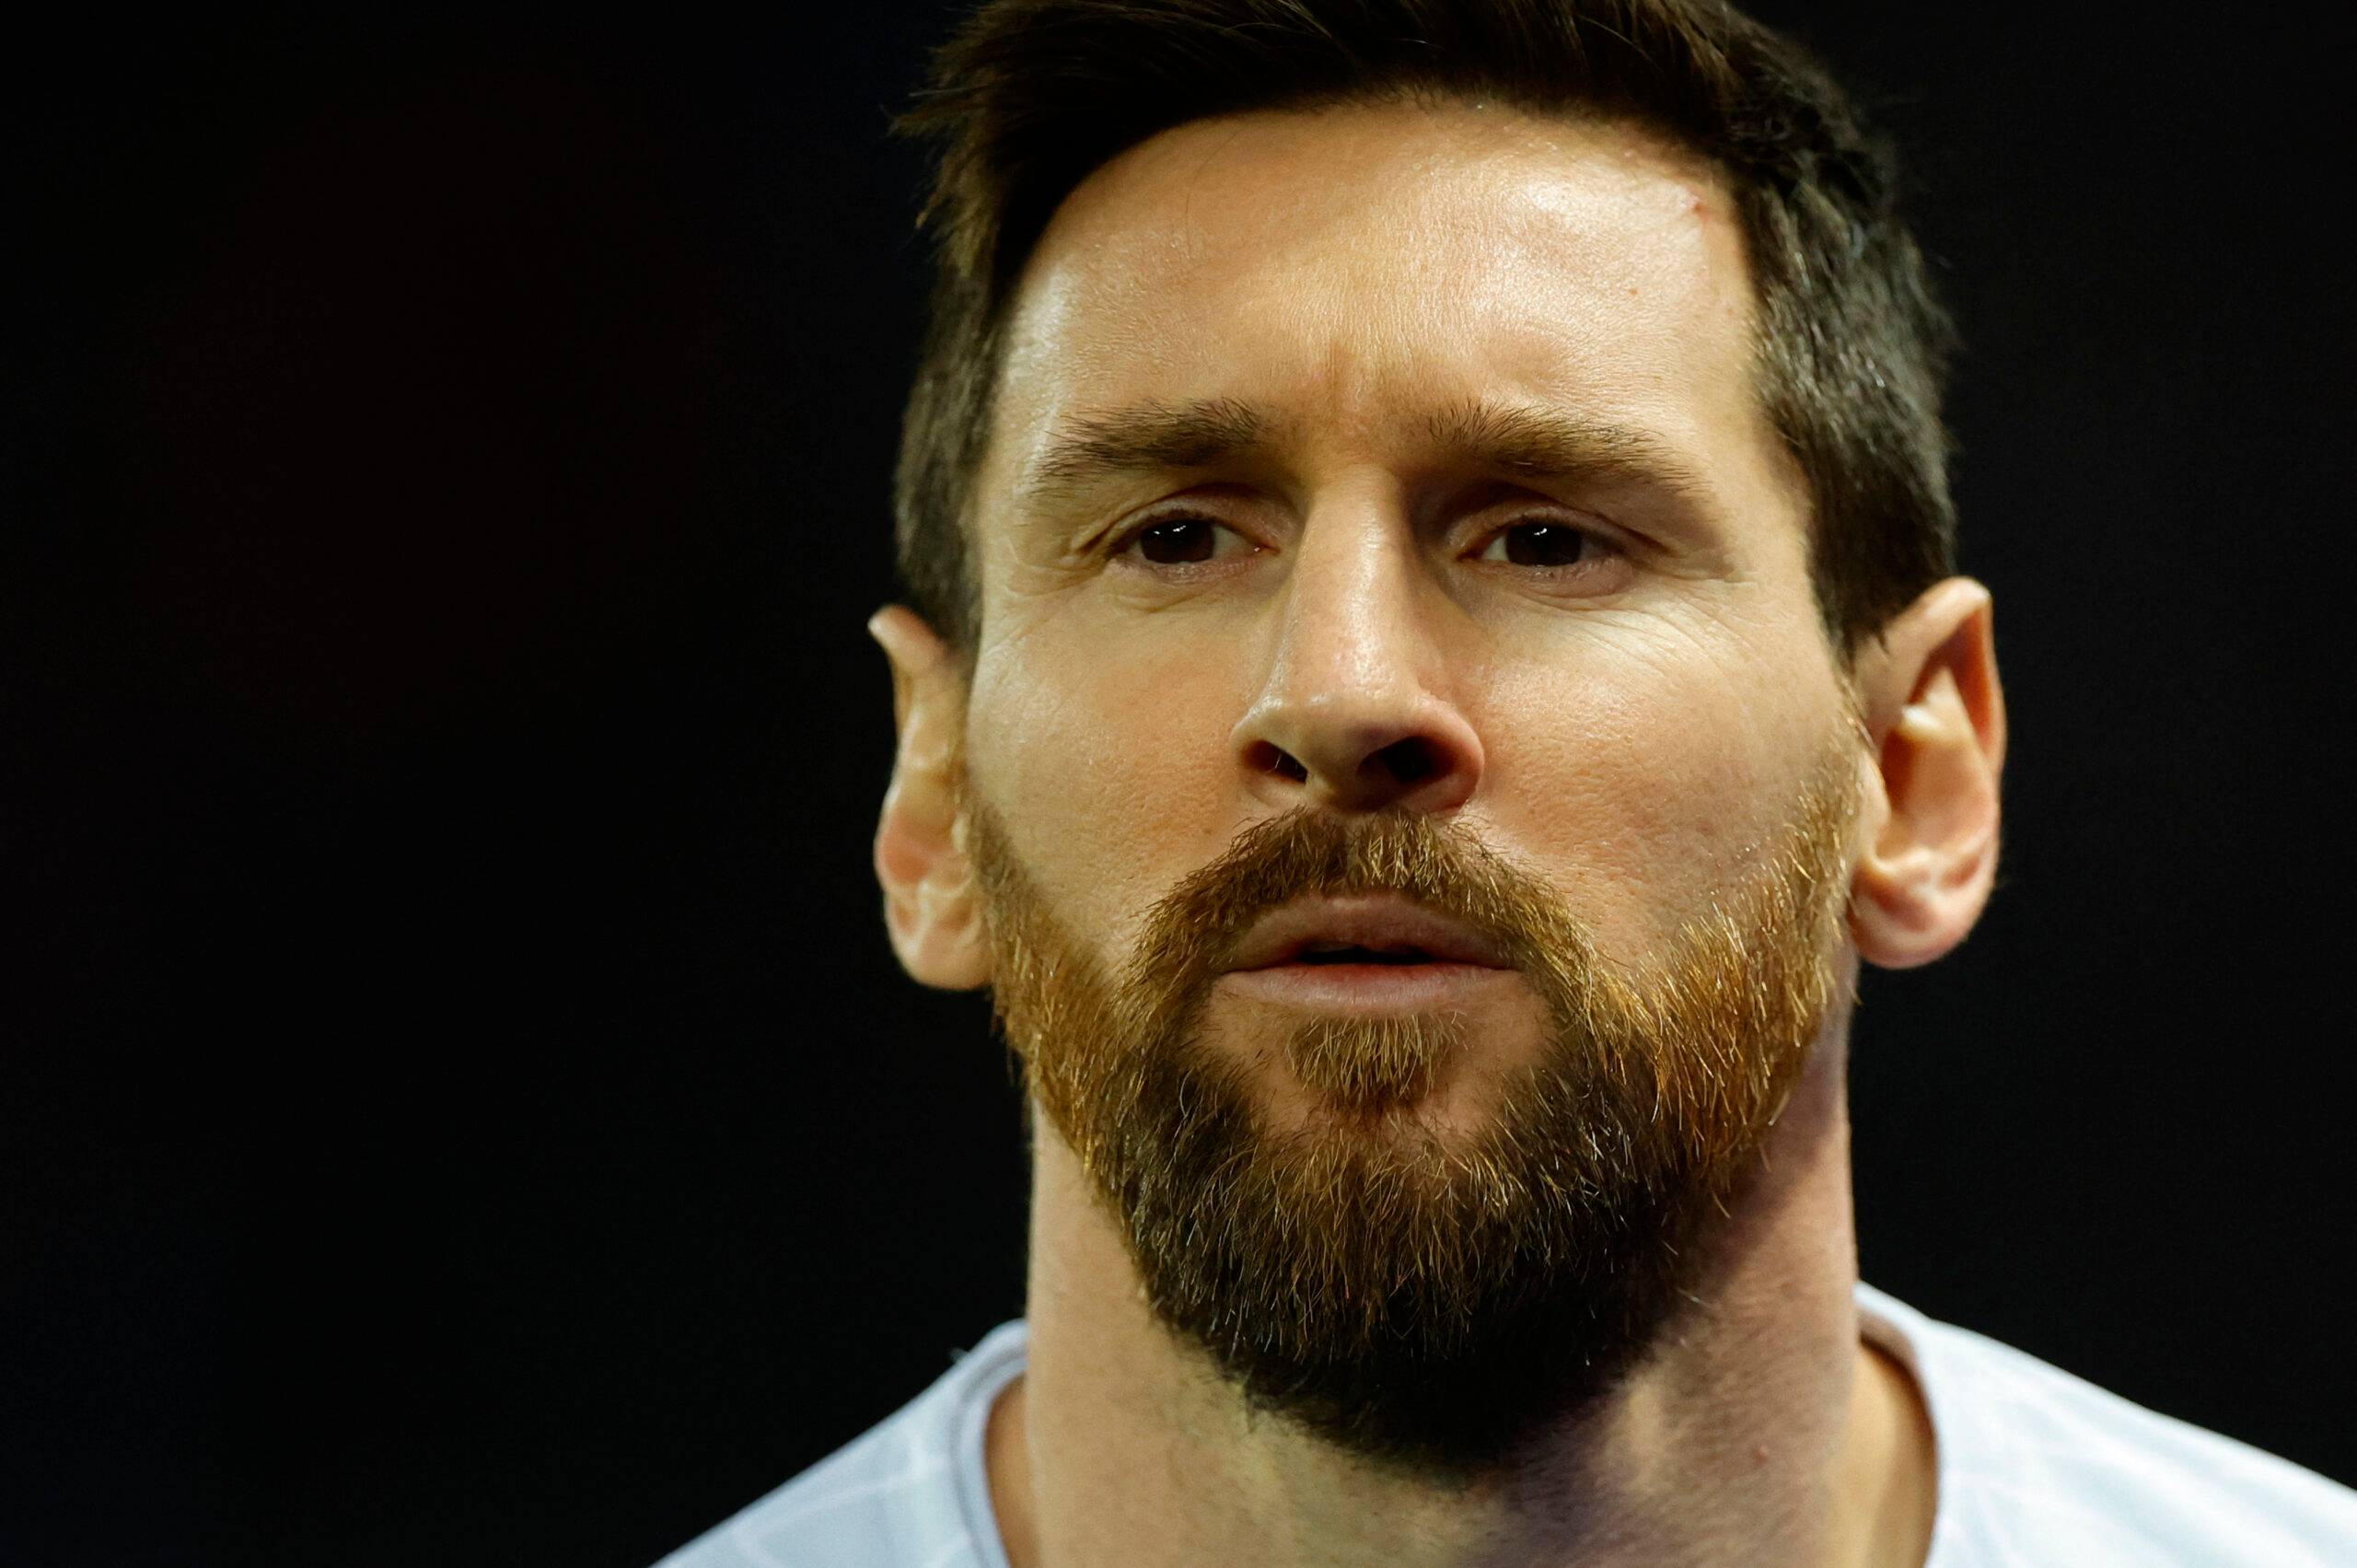 Lionel Messi: Fans briefly feared PSG star suffered injury ahead of 2022 World Cup